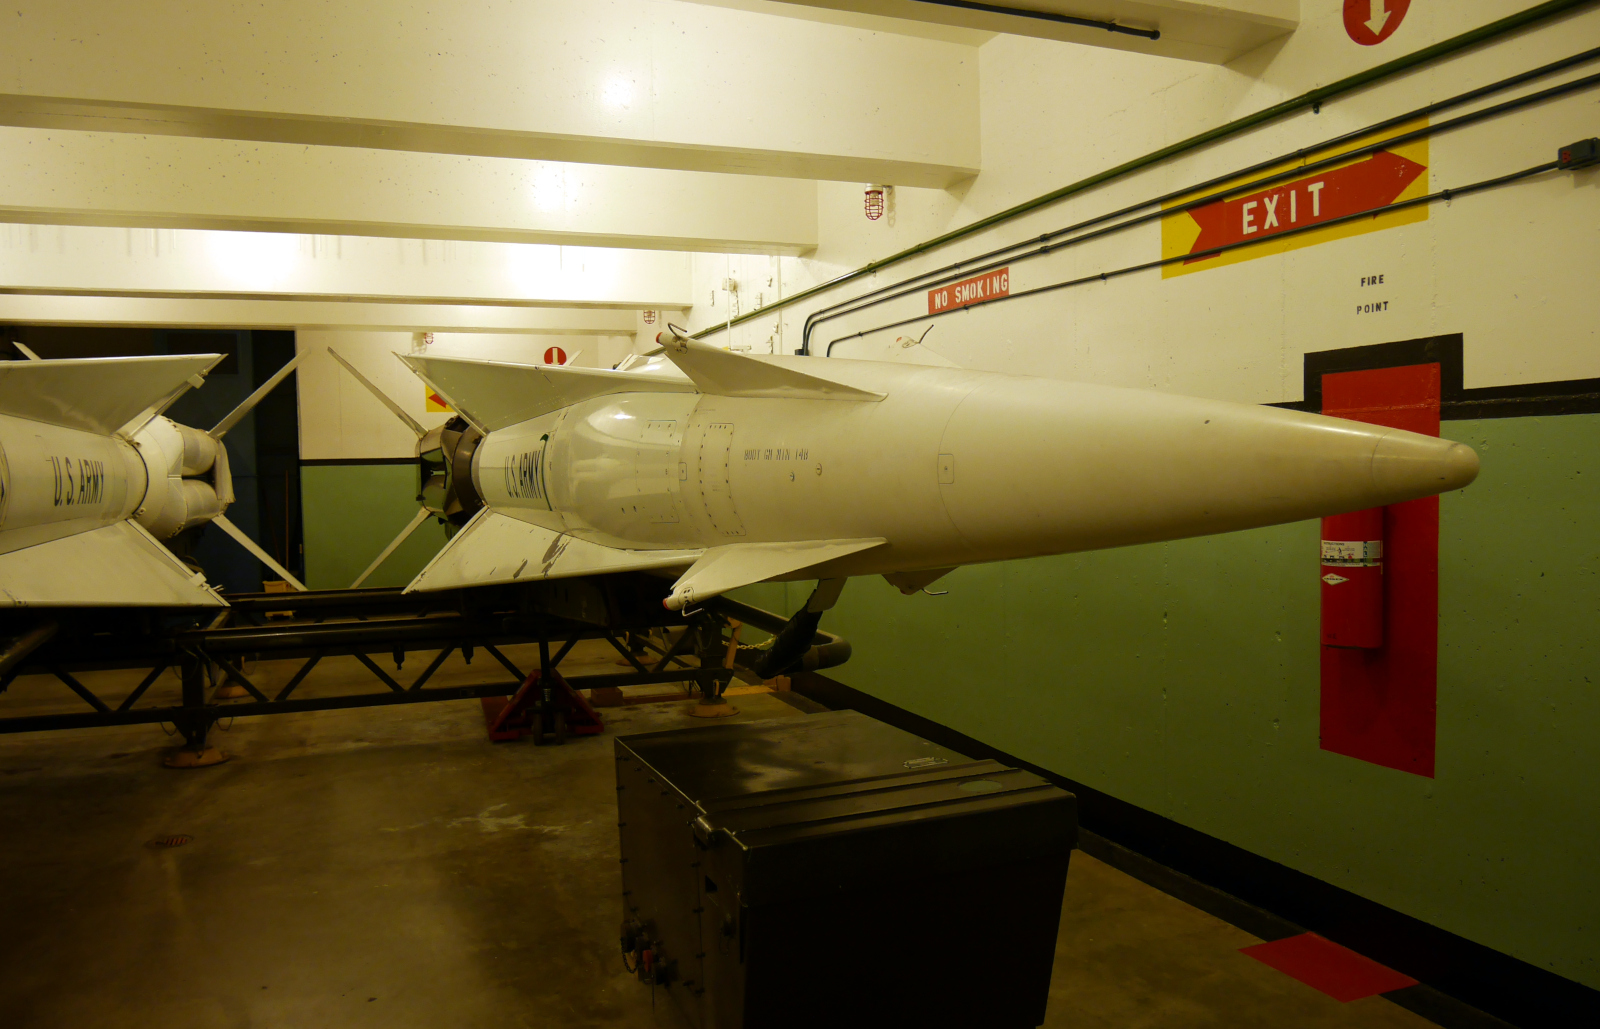 The Nike missiles of Cold-War San Francisco